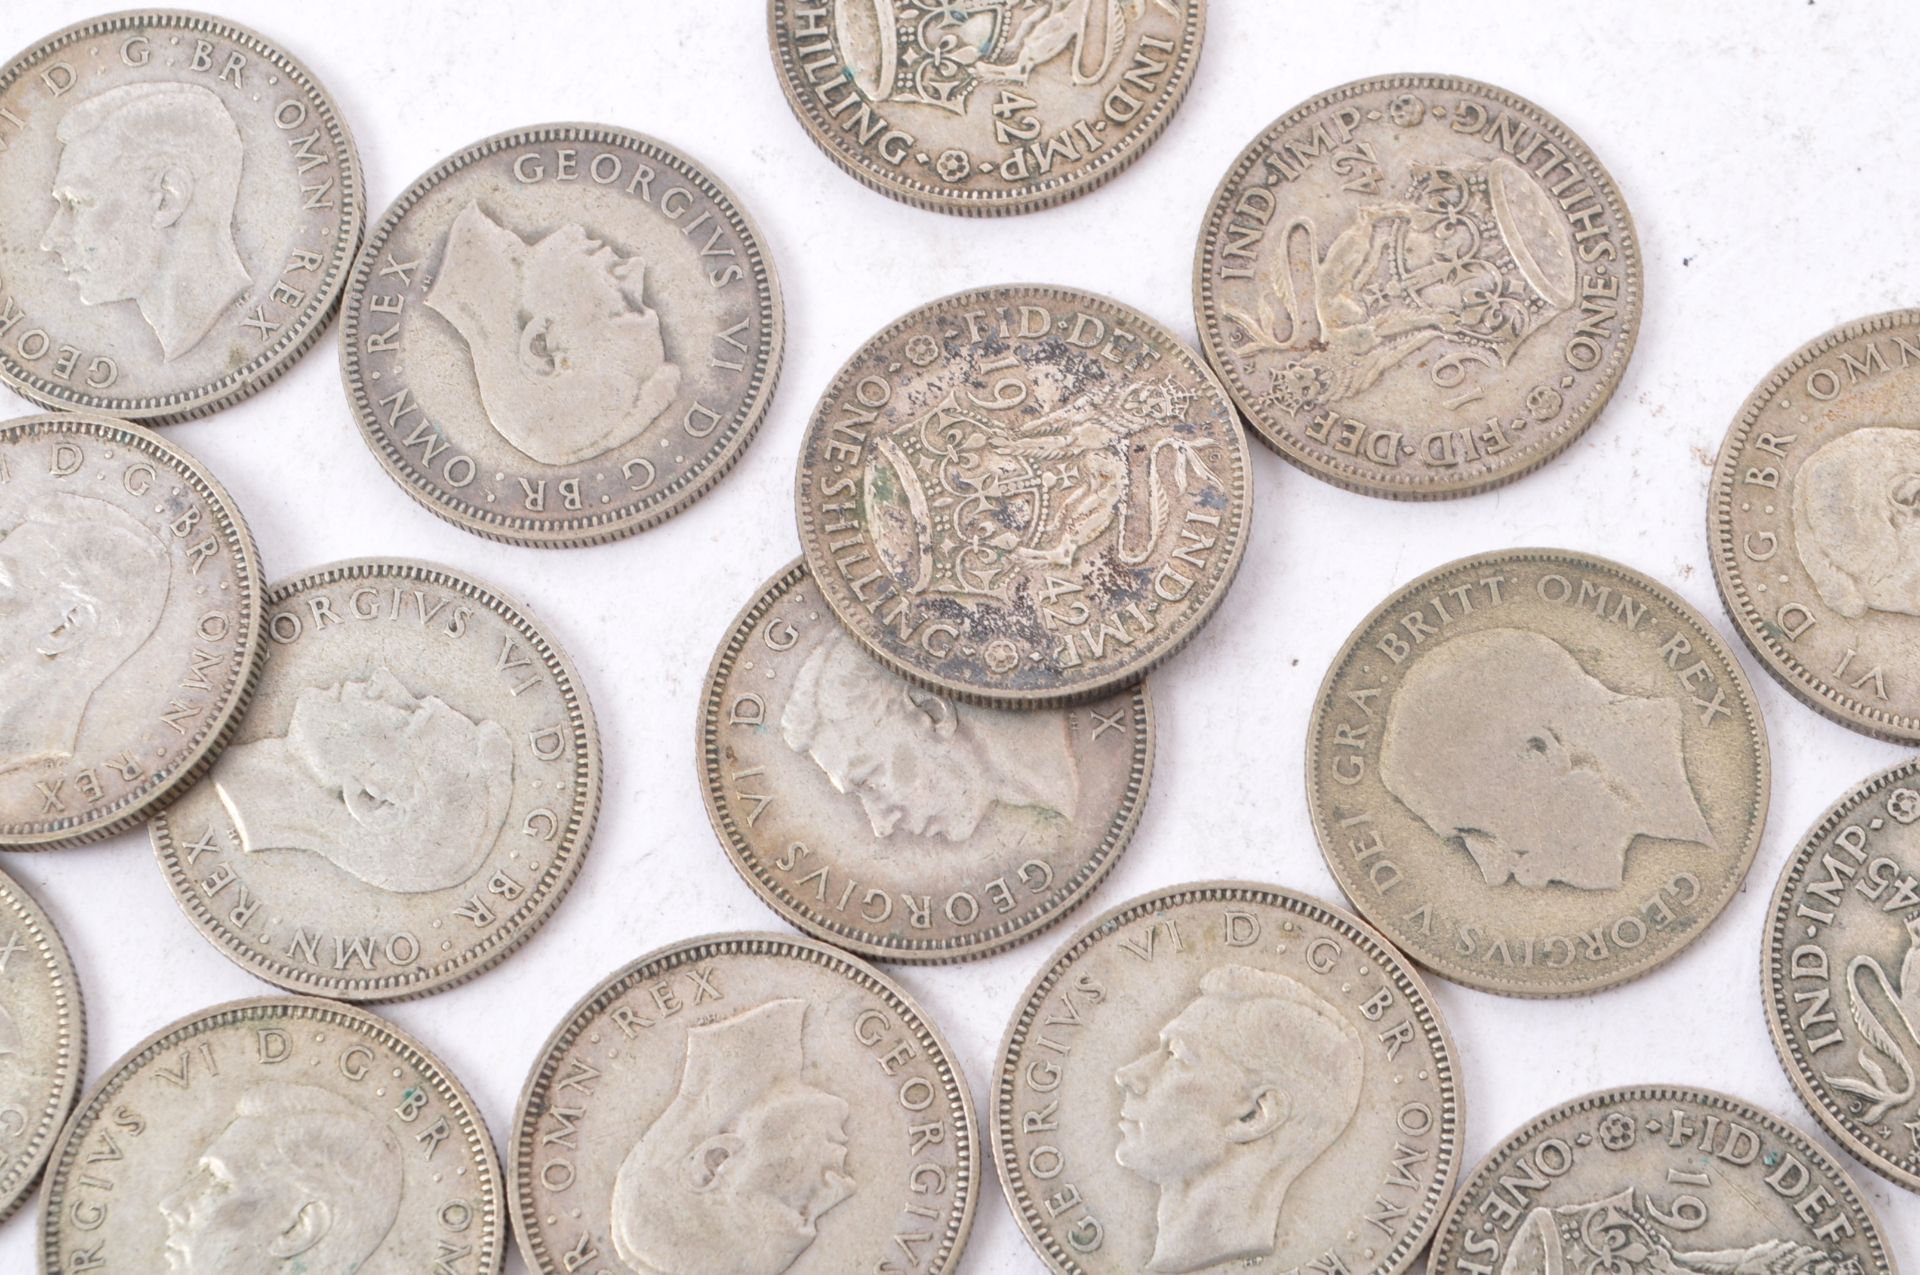 COLLECTION OF 20TH CENTURY SHILLING COINS - 322G - Image 4 of 6